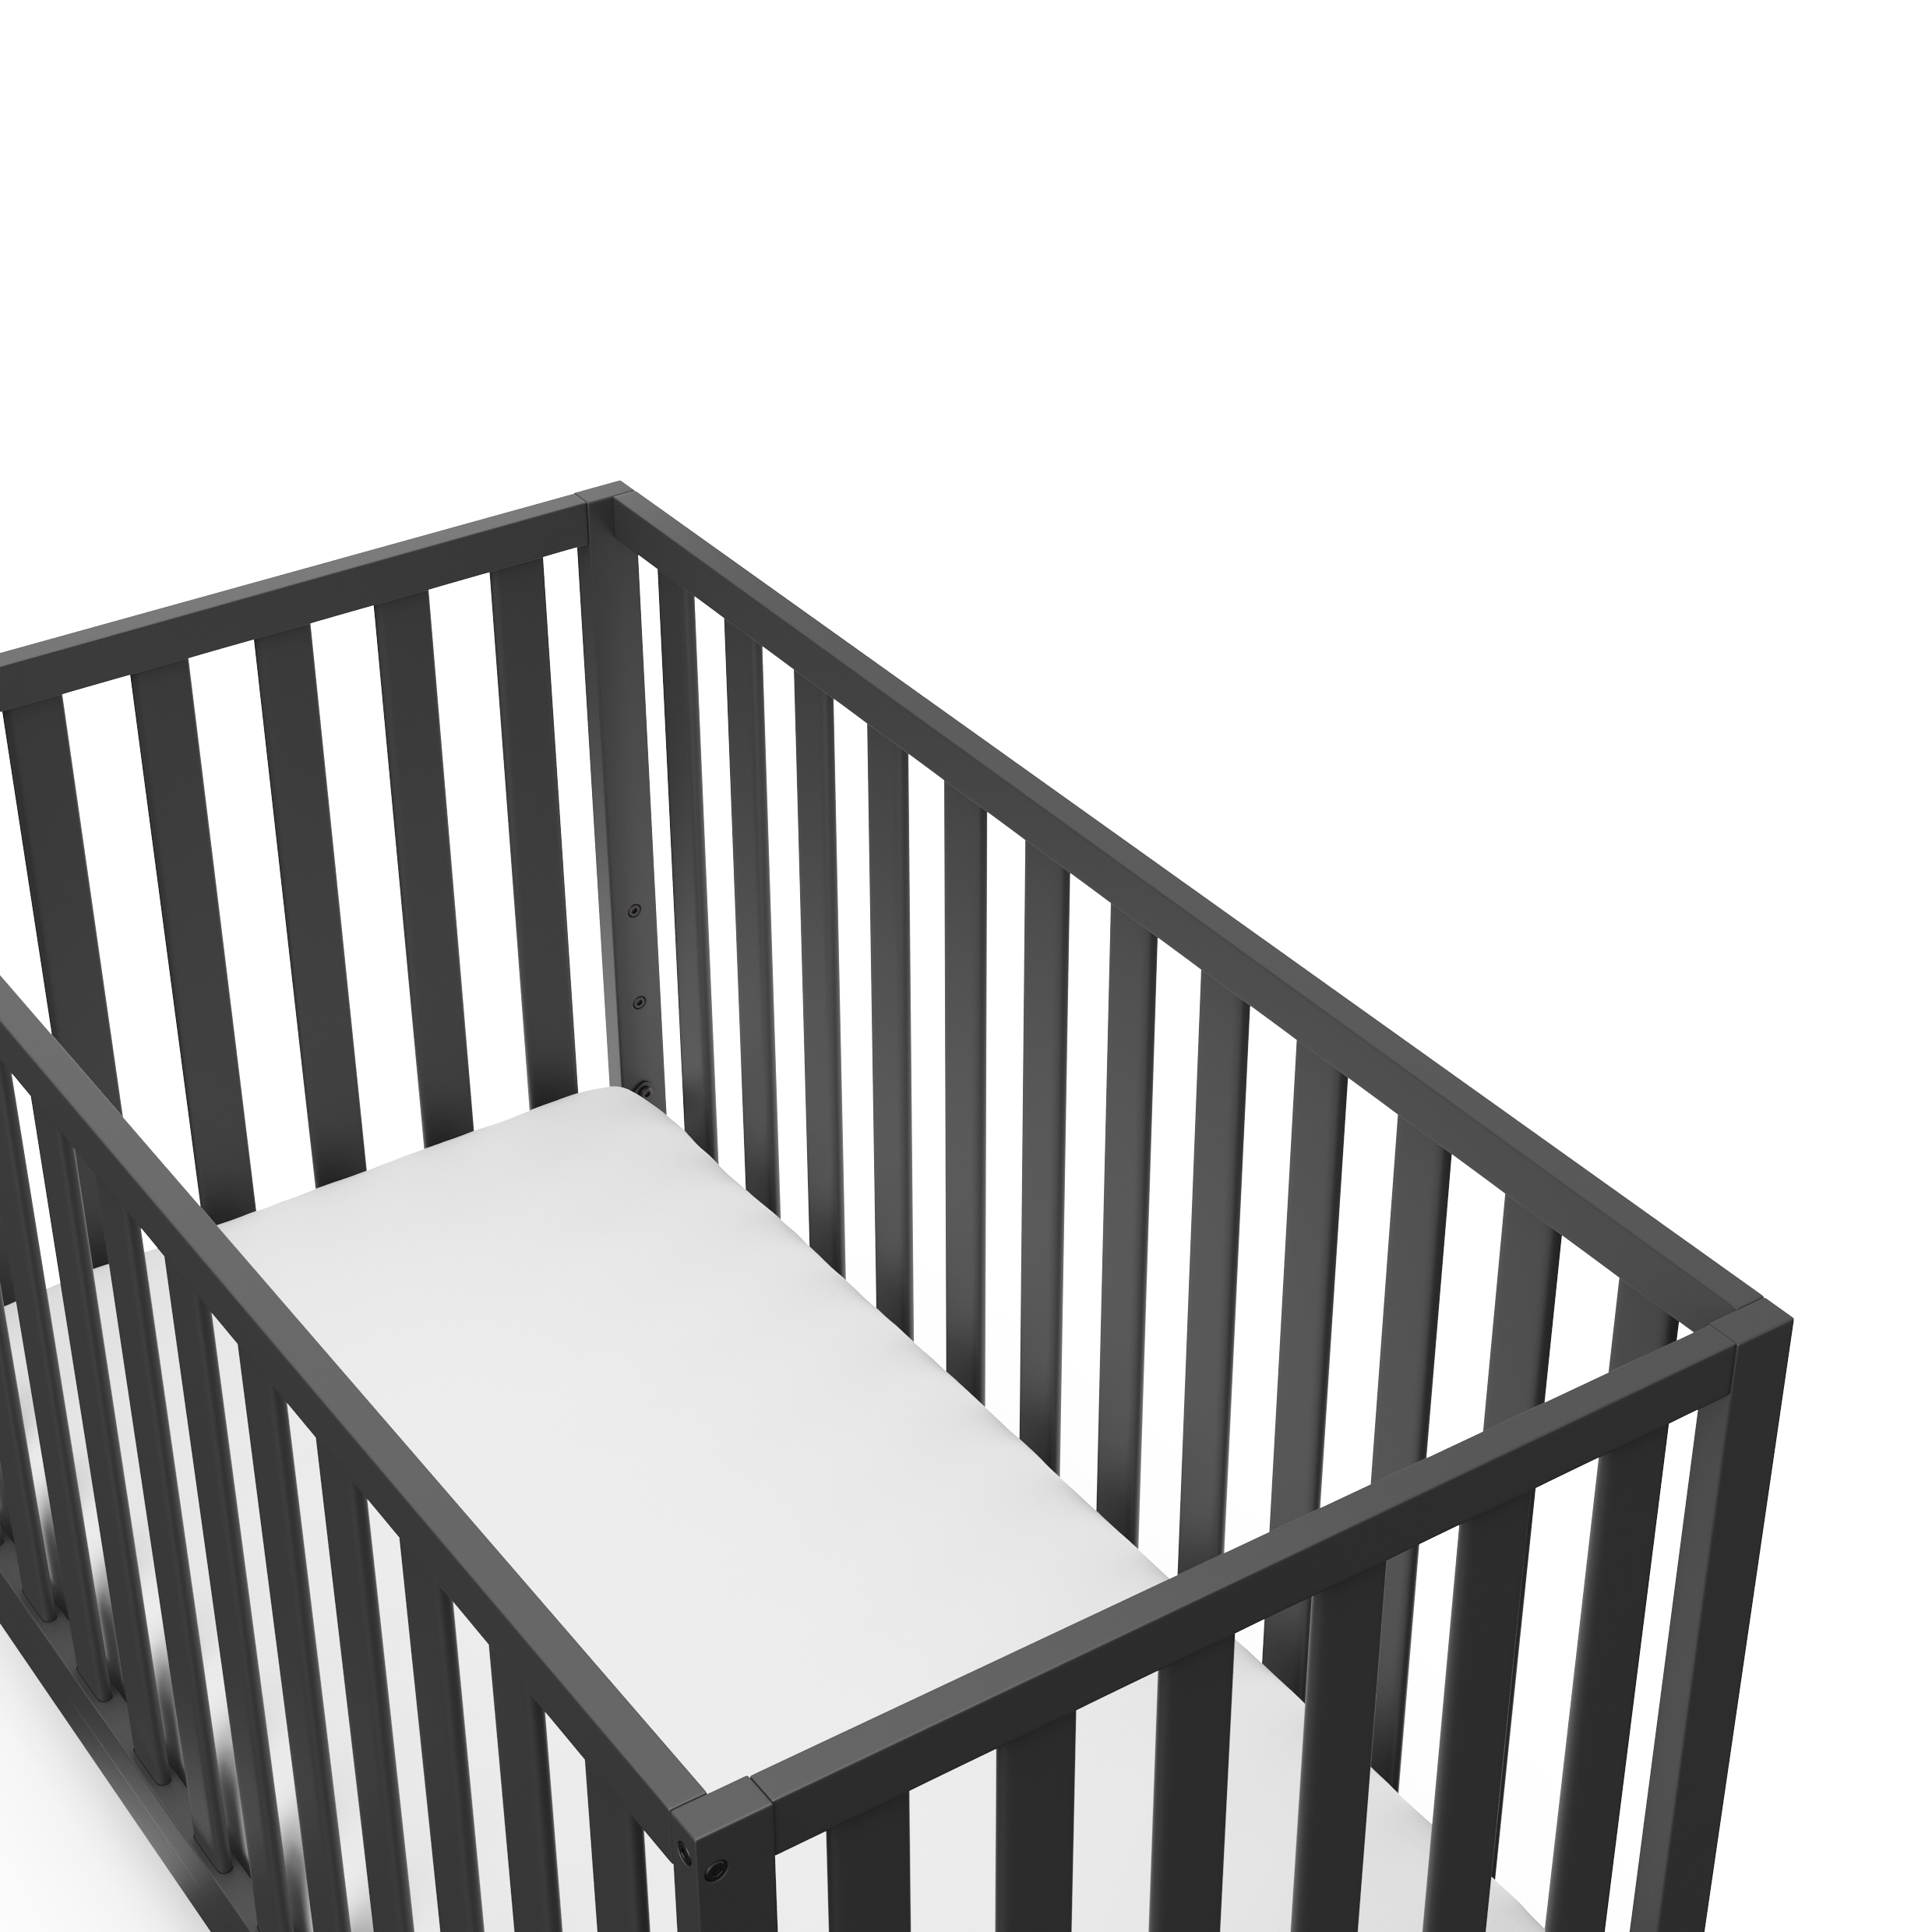 Storkcraft Sunset 4-in-1 Convertible Baby Crib, Gray - image 4 of 7